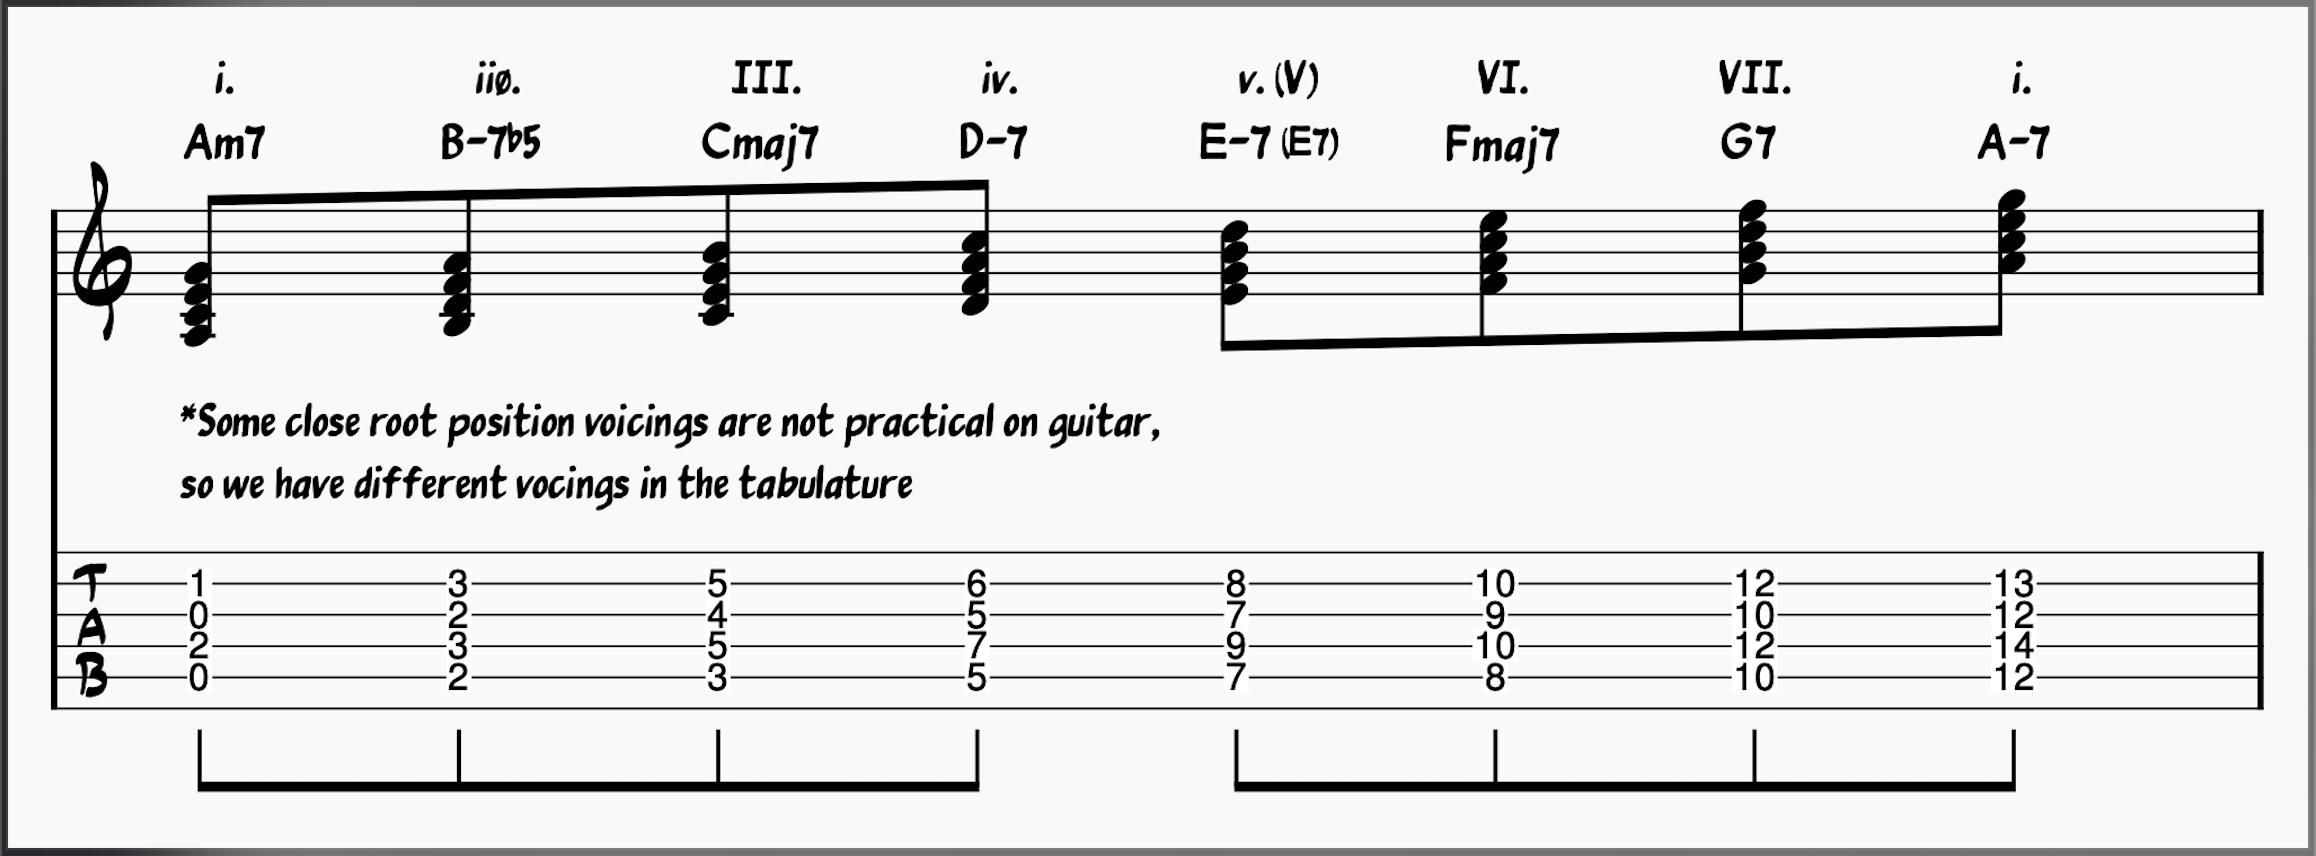 A minor chord scale with notation and guitar tabulature